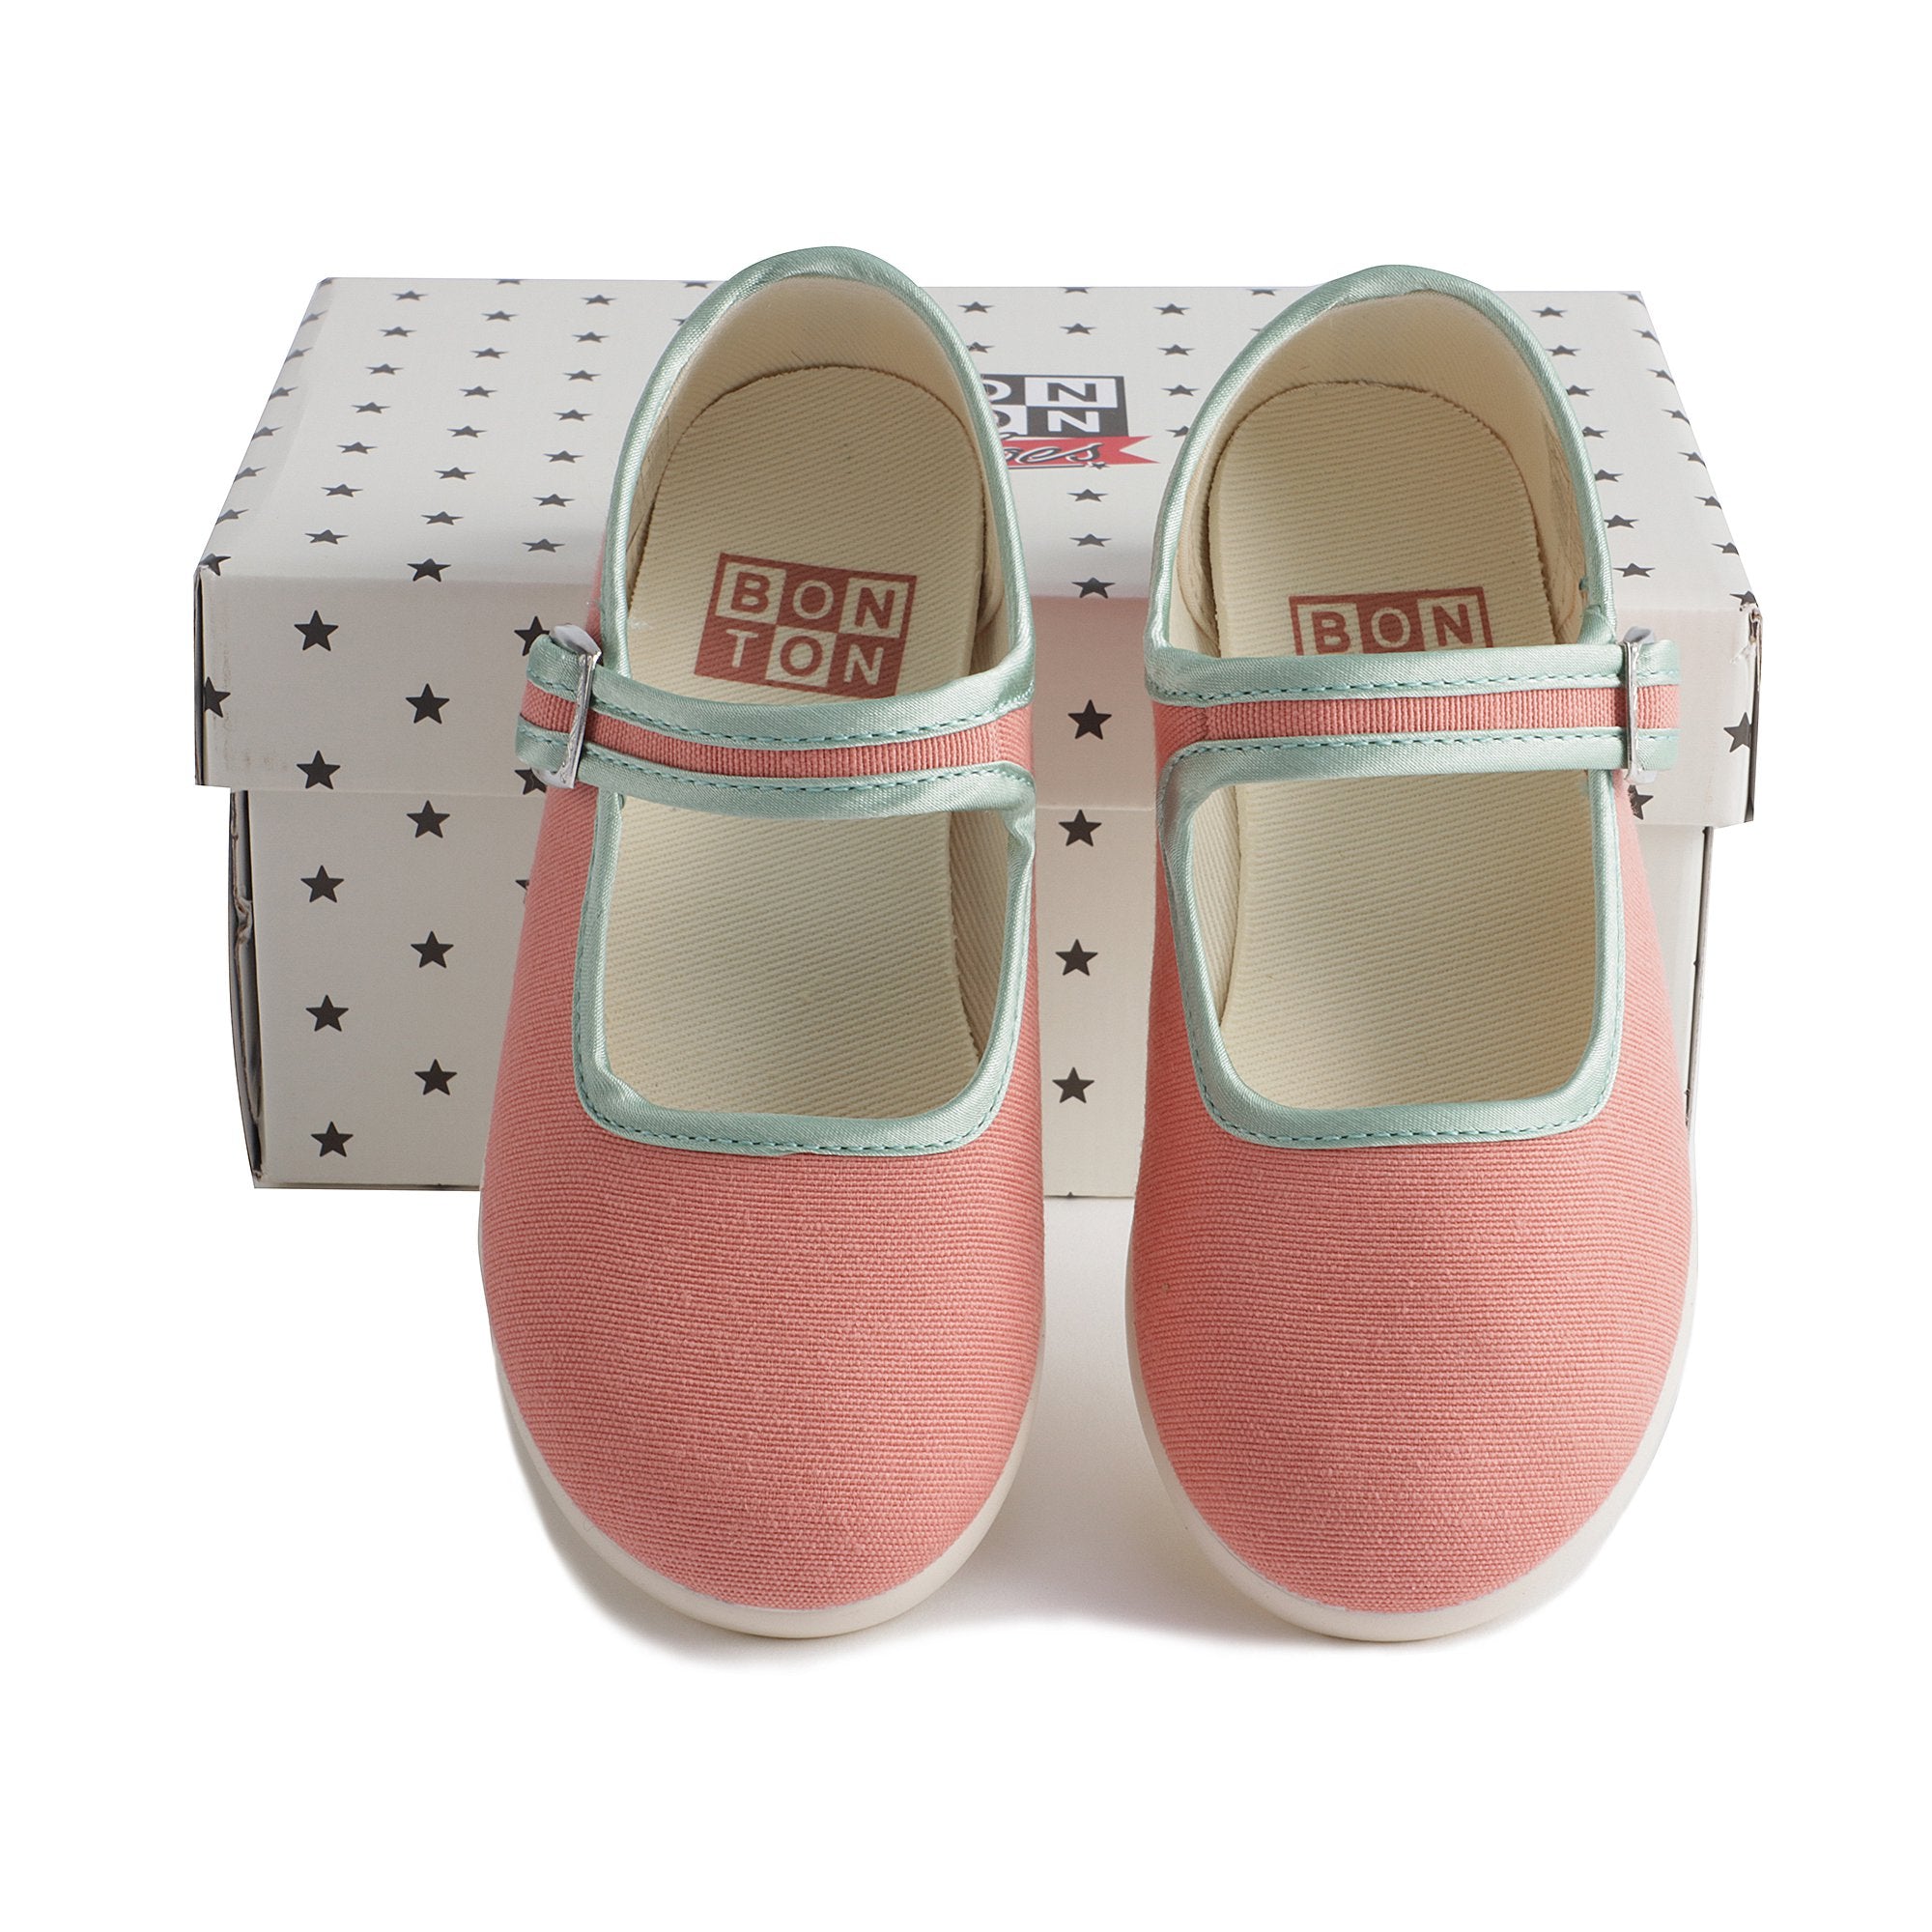 Girls Rose Buckled Cotton Shoes